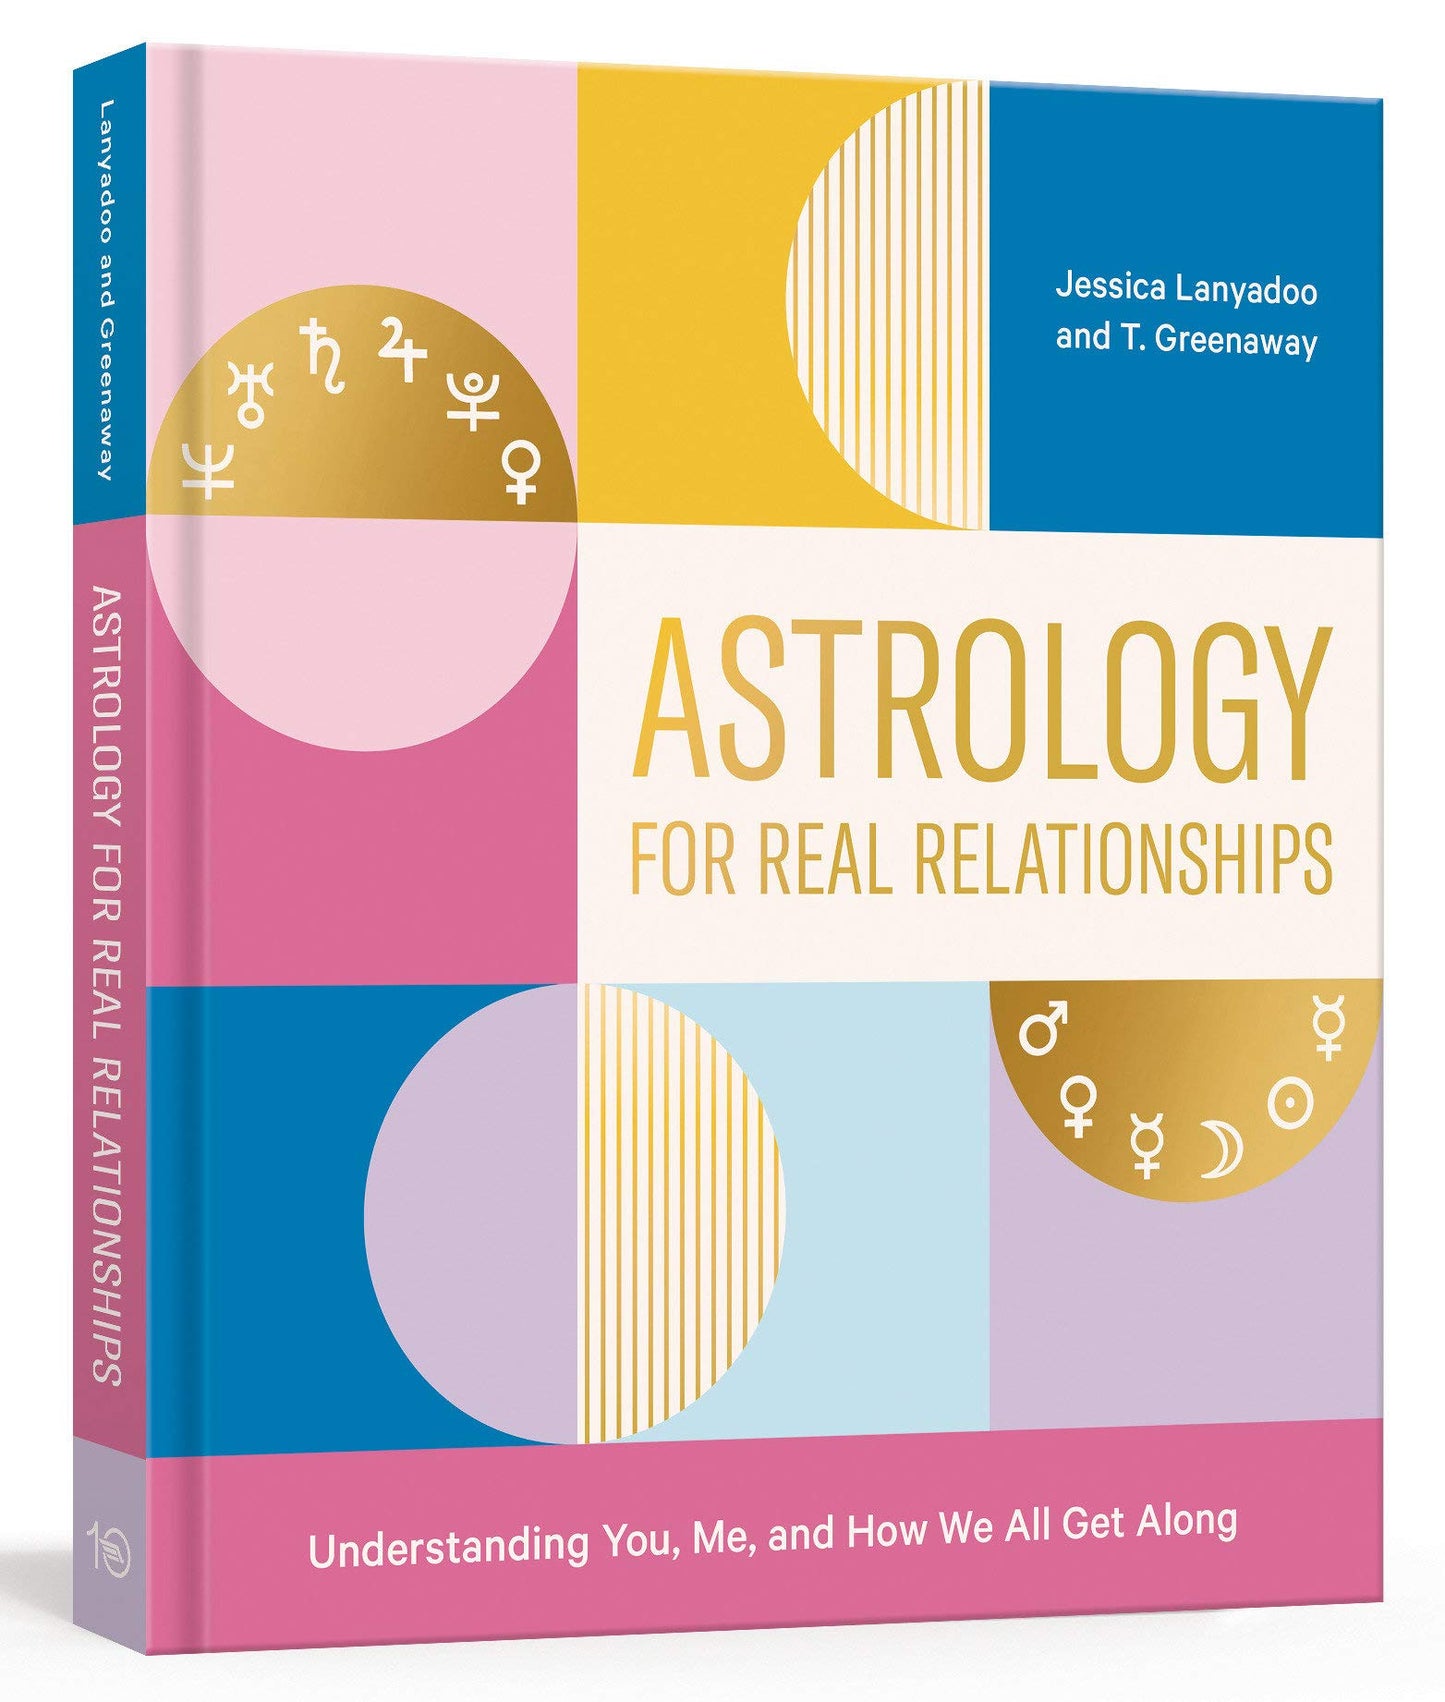 Astrology for Real Relationships // Understanding You, Me, and How We All Get Along